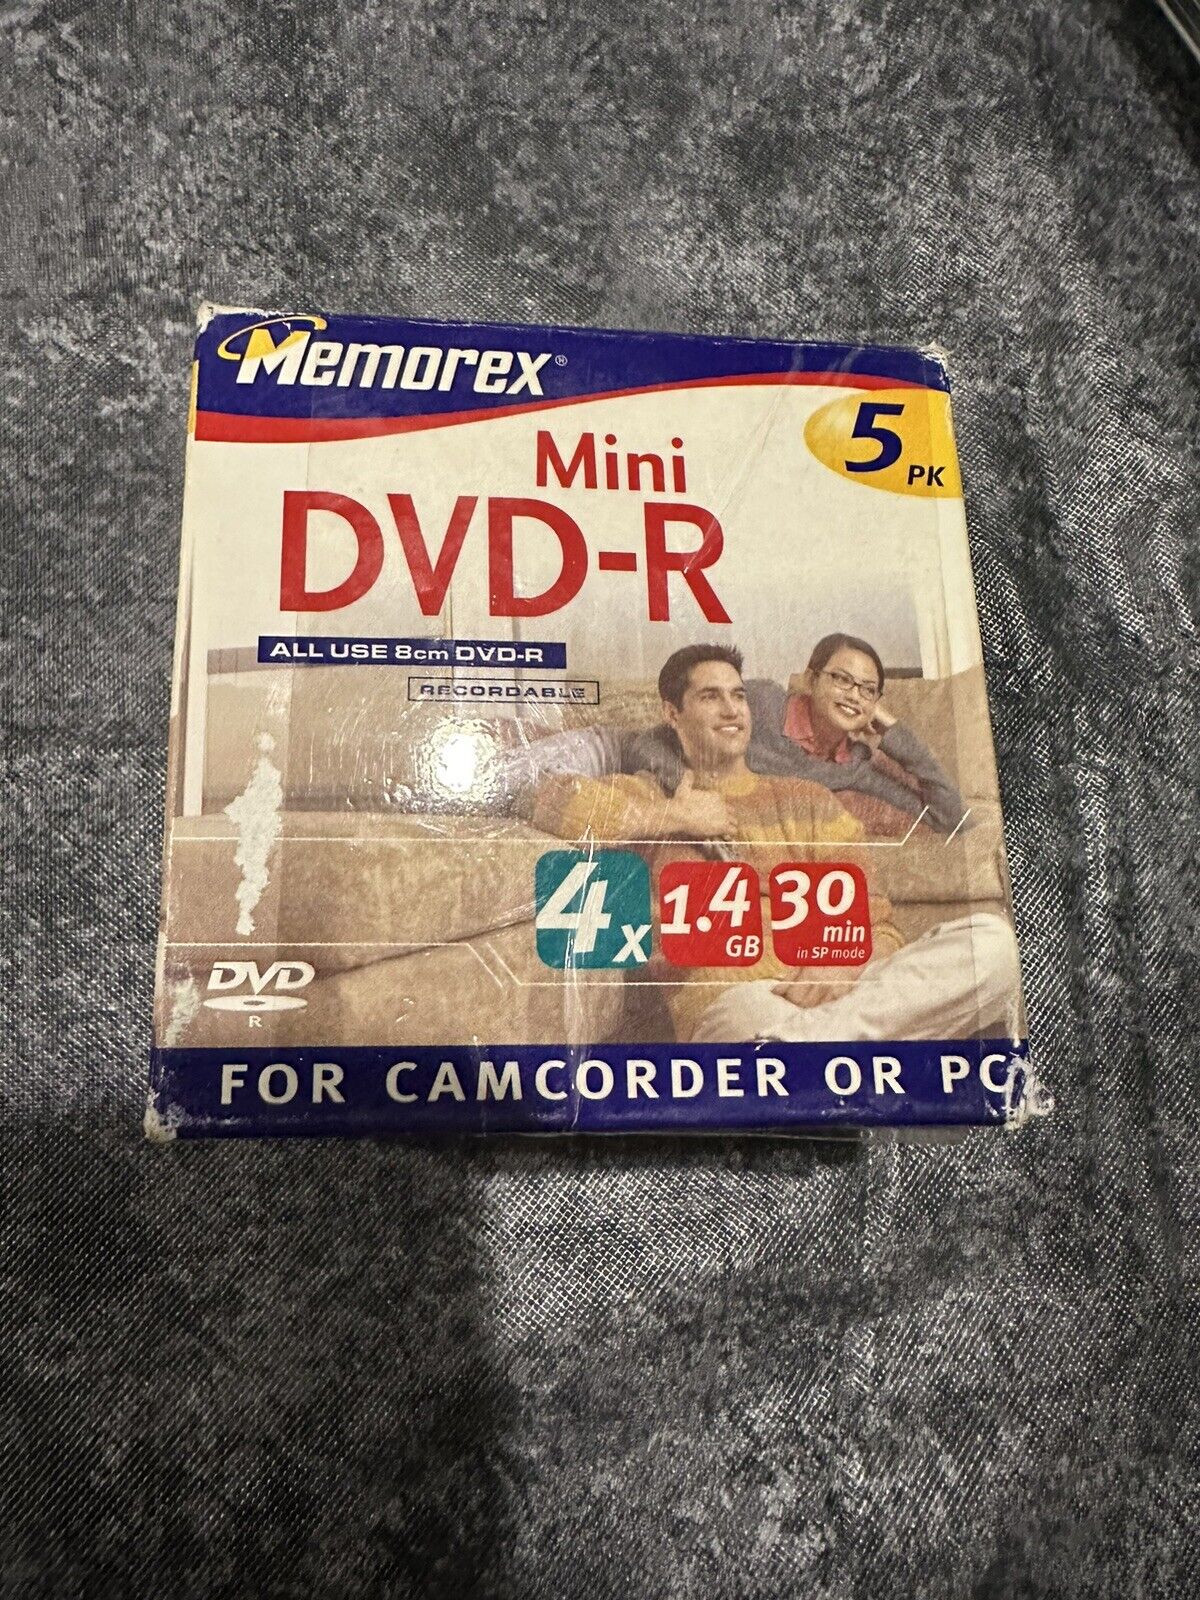 New in box Memorex 5 Pack Mini DVD-R For DVD Camcorders Or PC